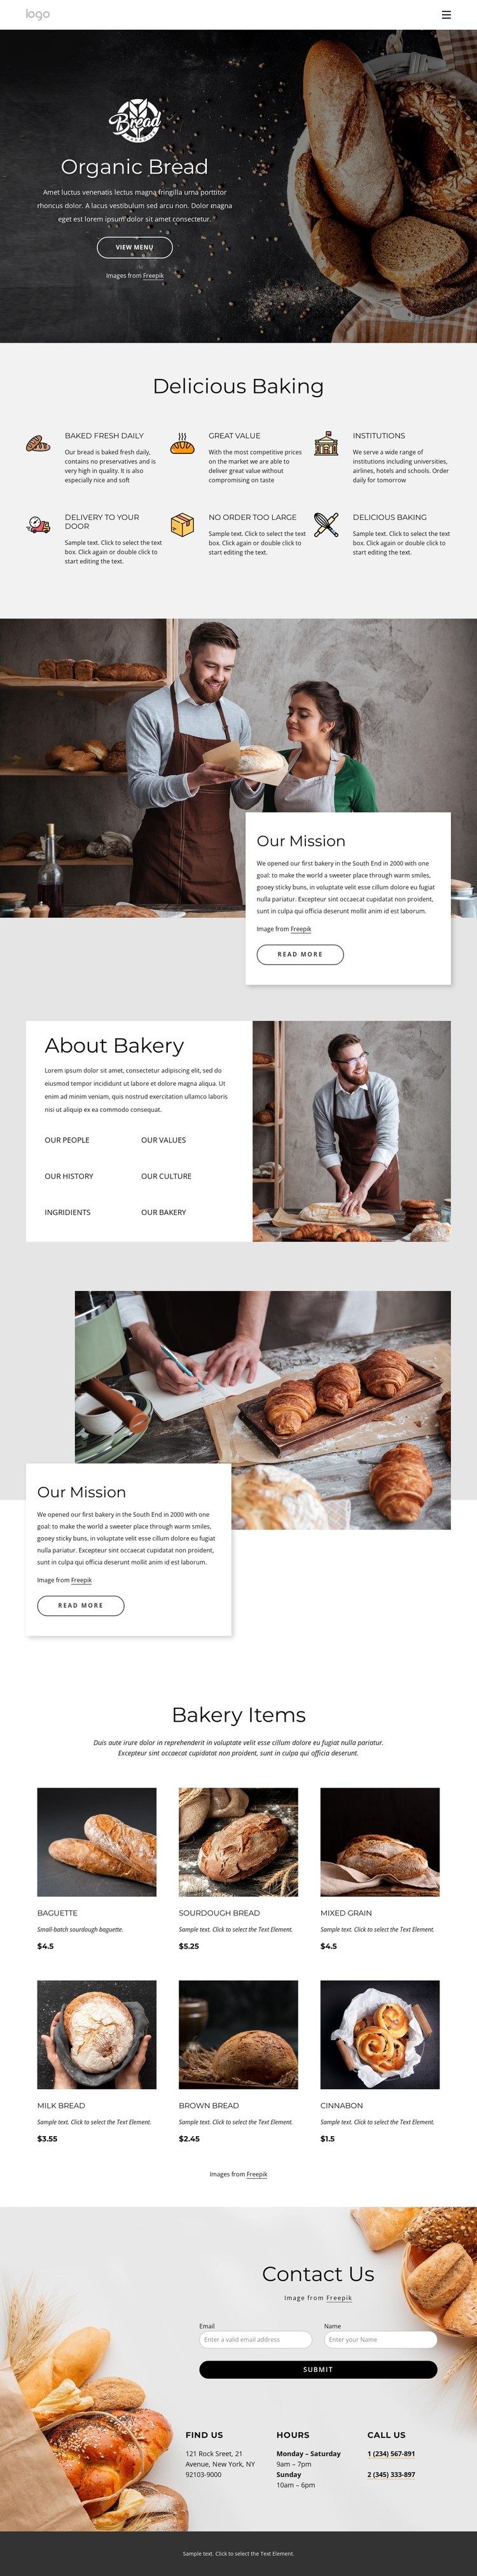 Bagels, buns, rolls, biscuits and loaf breads CSS Template